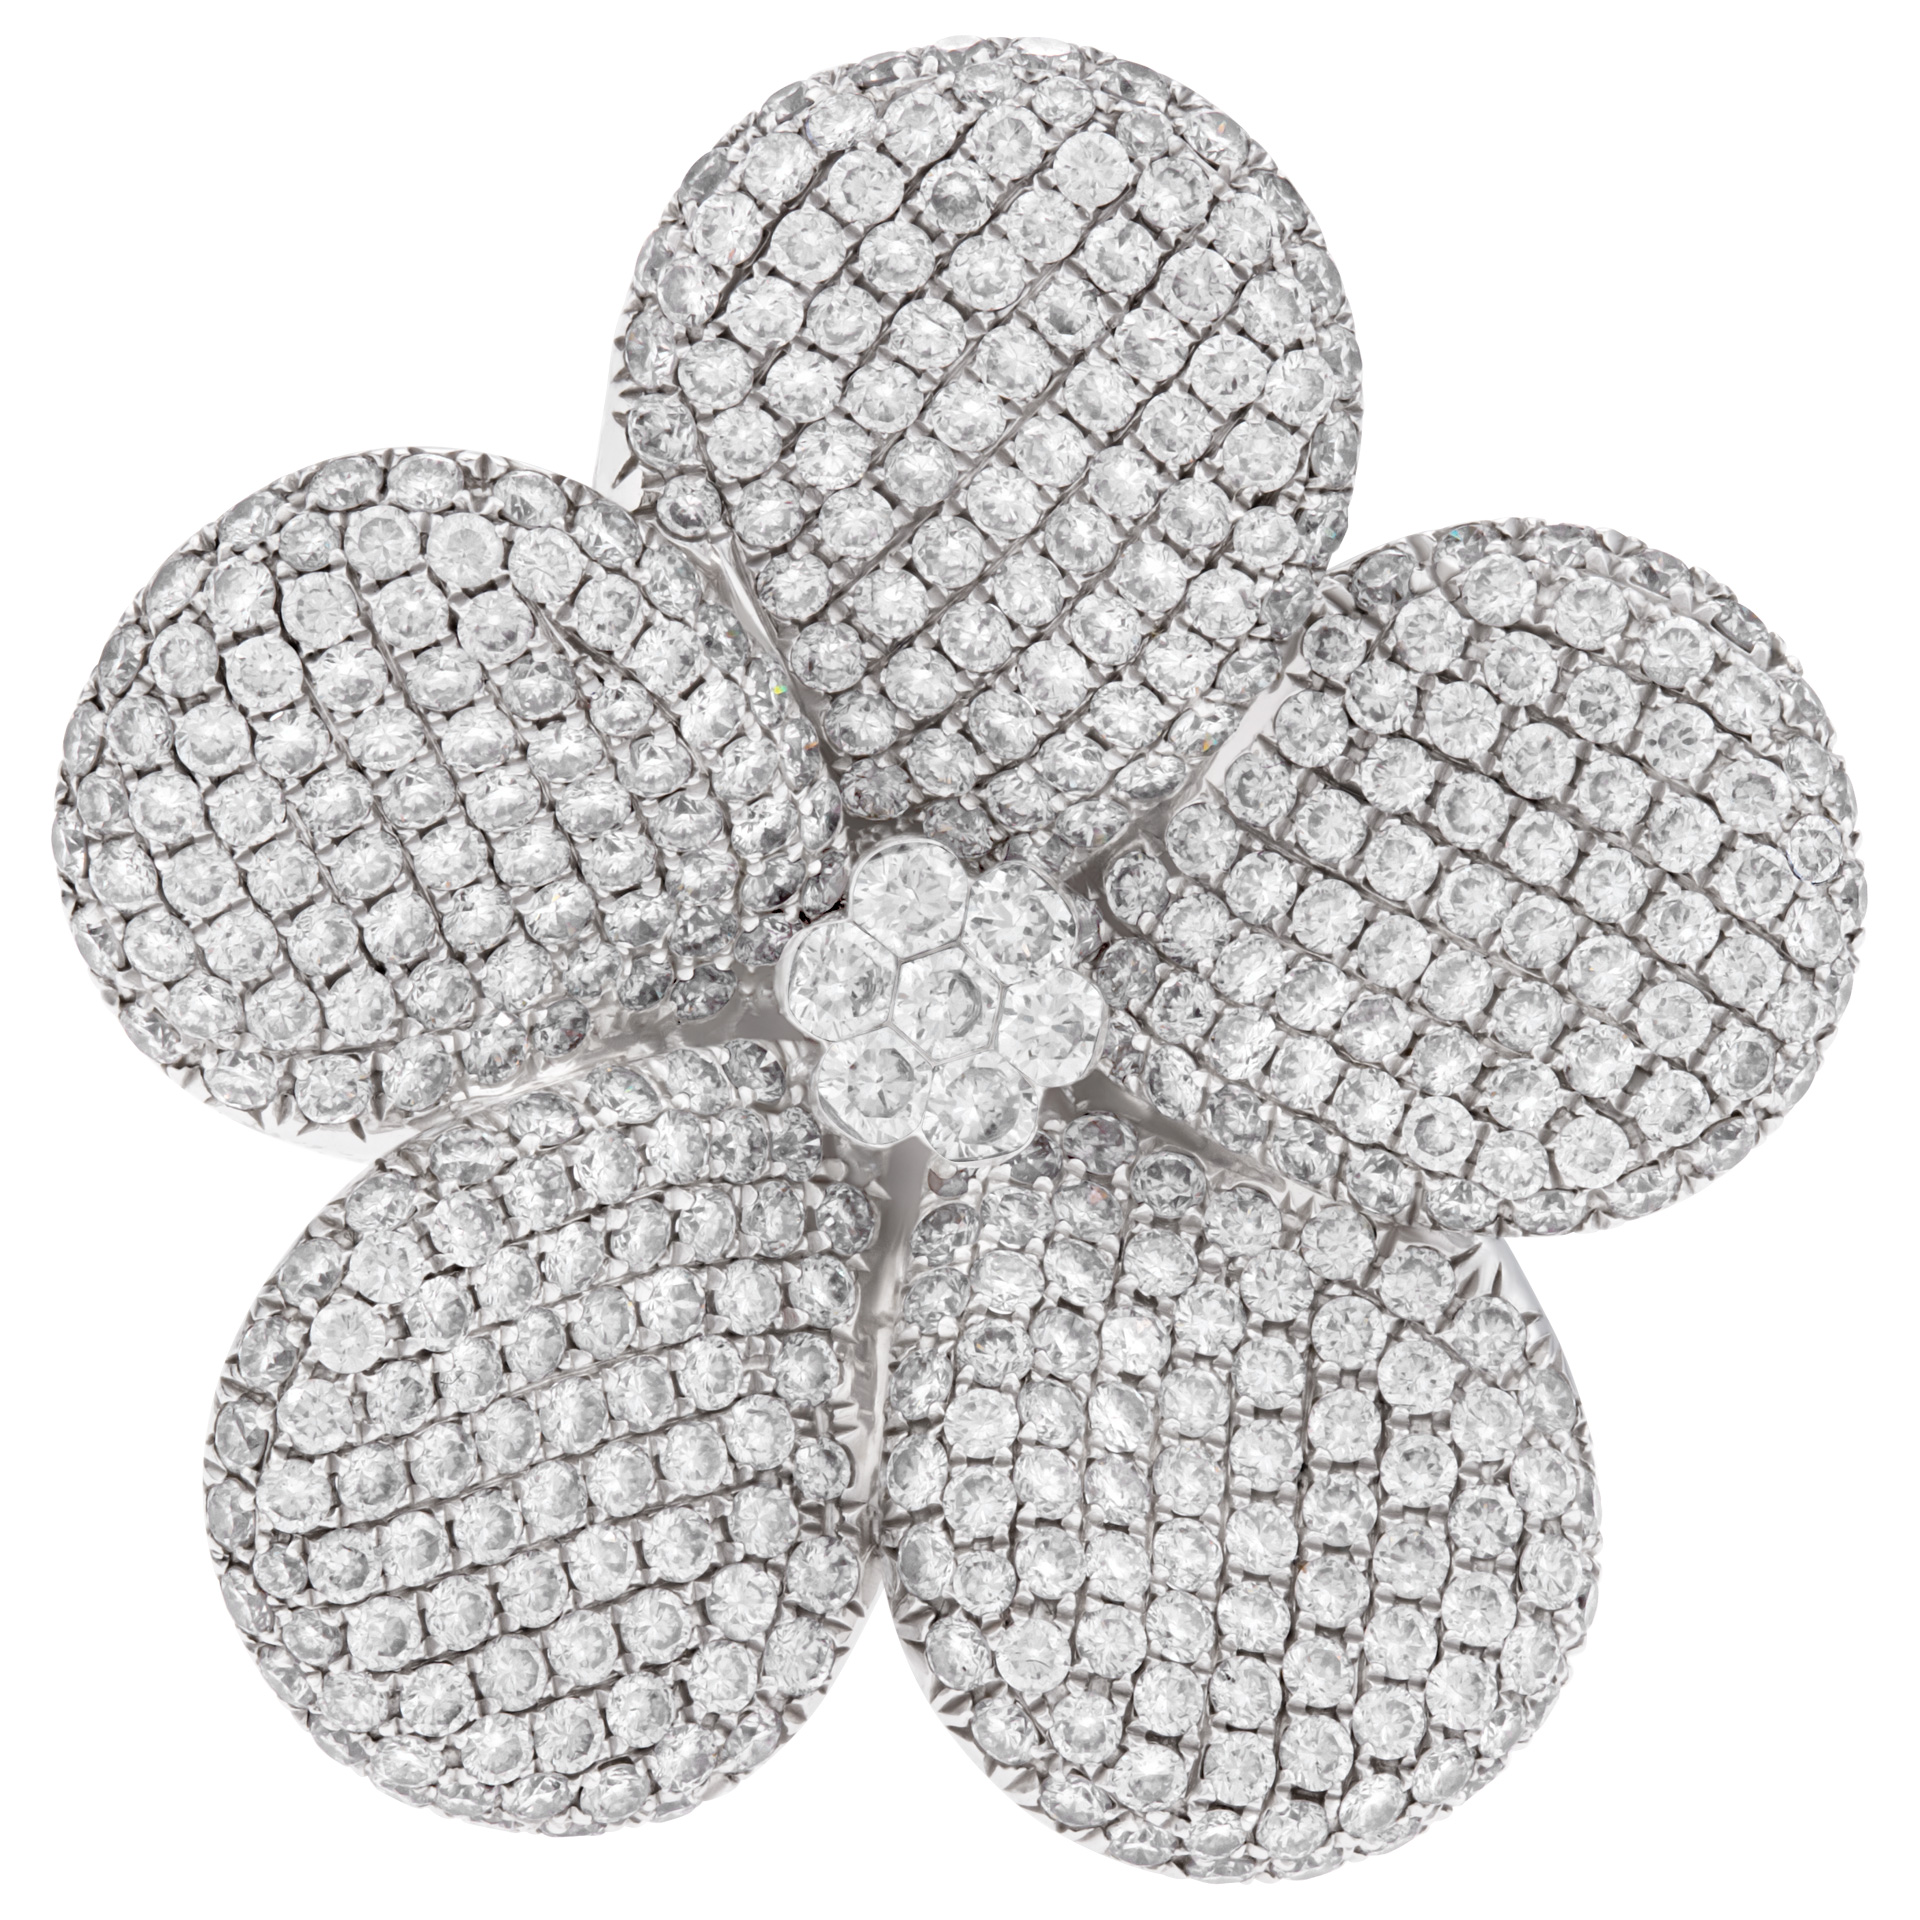 Pave diamond flower ring in 18k white gold w/ approx. 4.92 carats in round white diamonds image 1